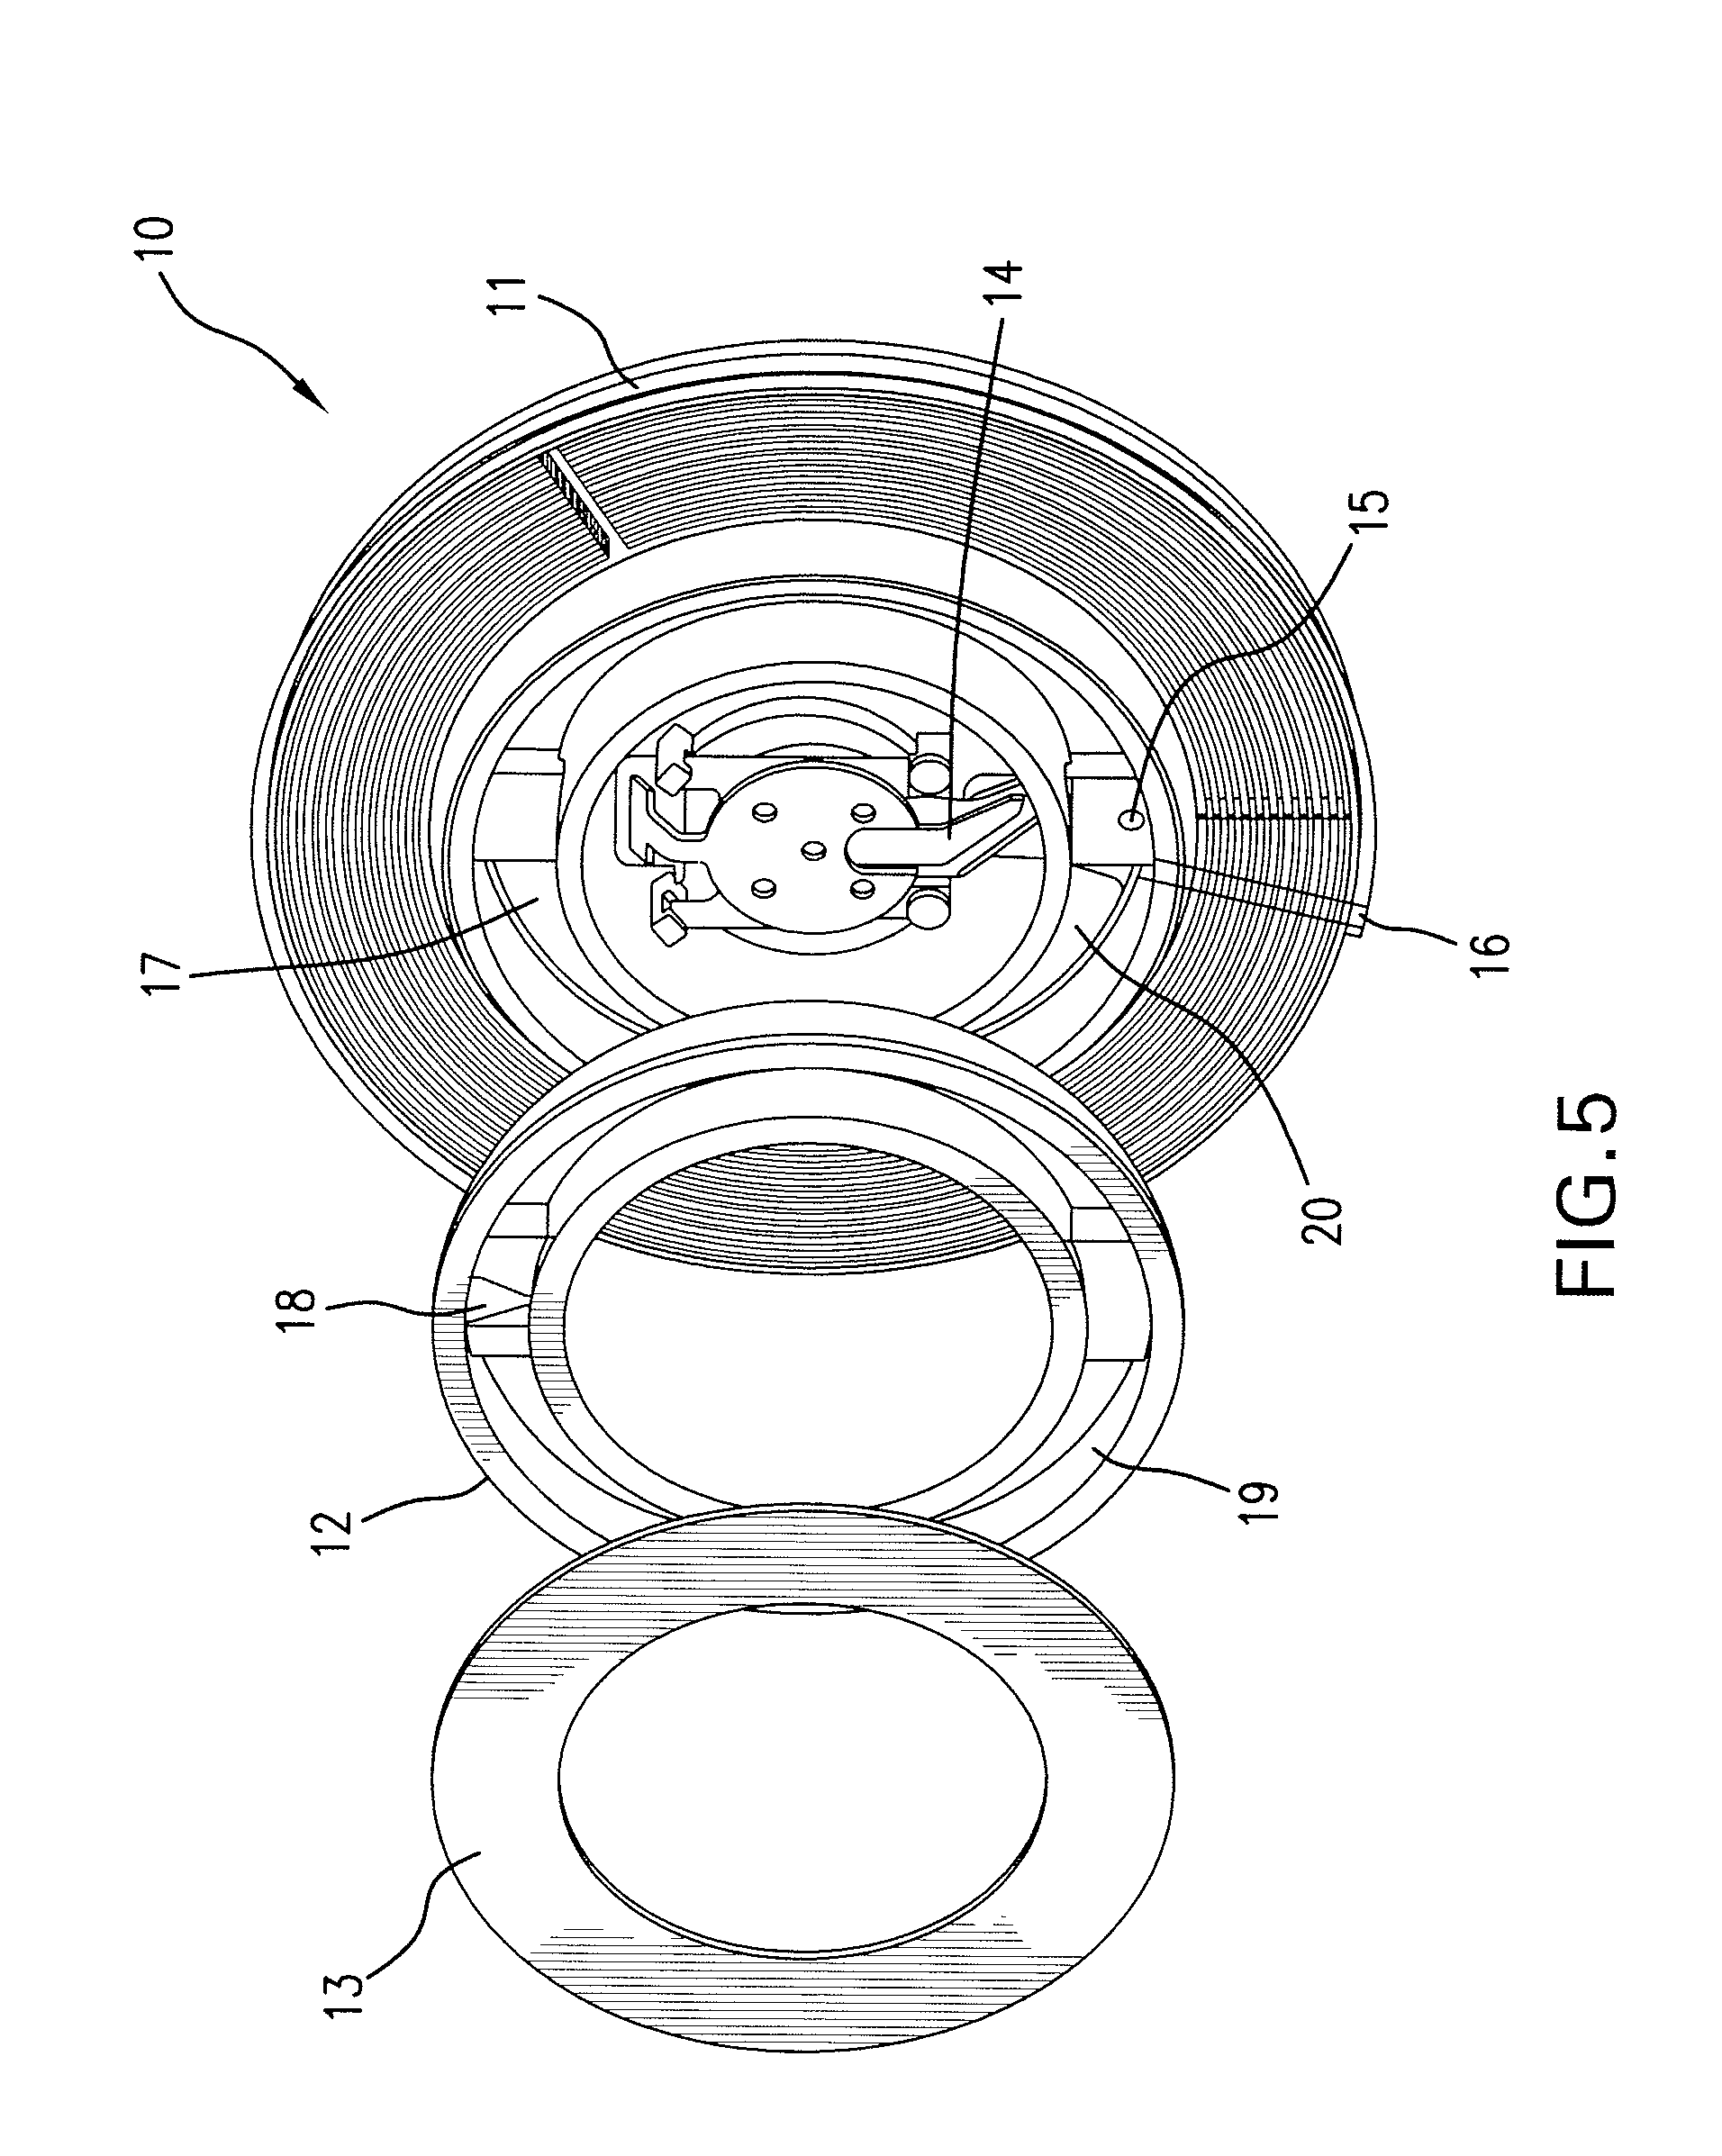 Viscous friction clutch for driving a cooling fan in a motor vehicle